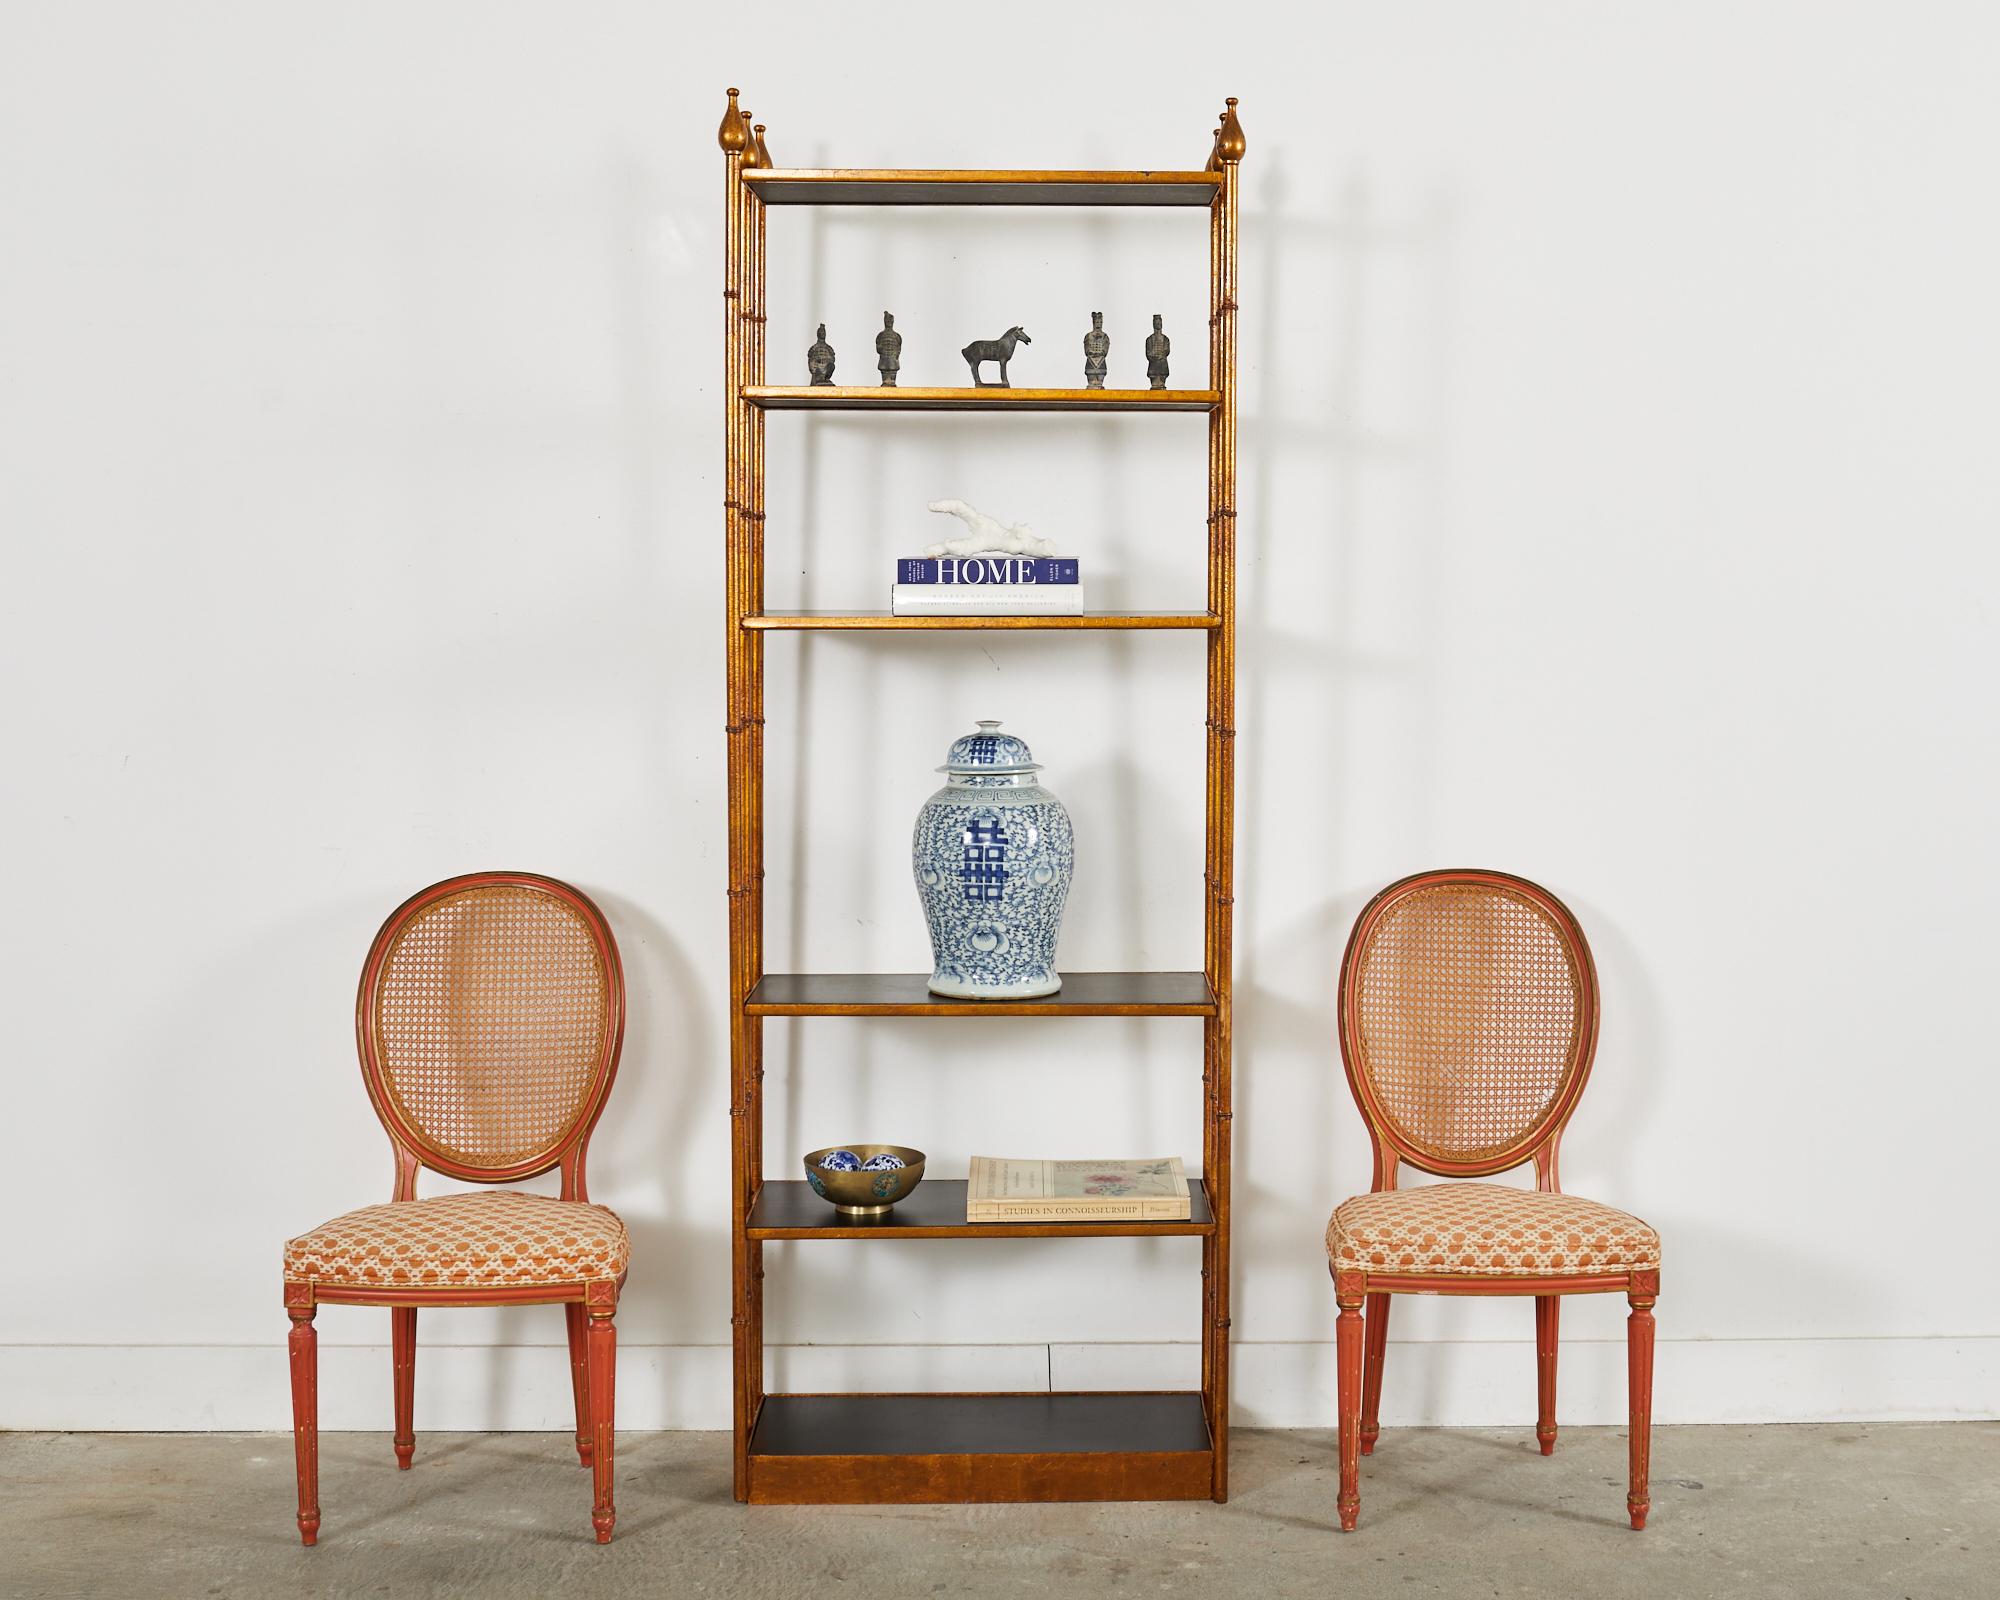 Stunning pair of matching midcentury Italian regency etagere display shelves or bookcases. The shelves feature a dramatic gilt finish on the iron faux bamboo frames inset with six black laminate ebonized wood shelves. The etageres are topped with